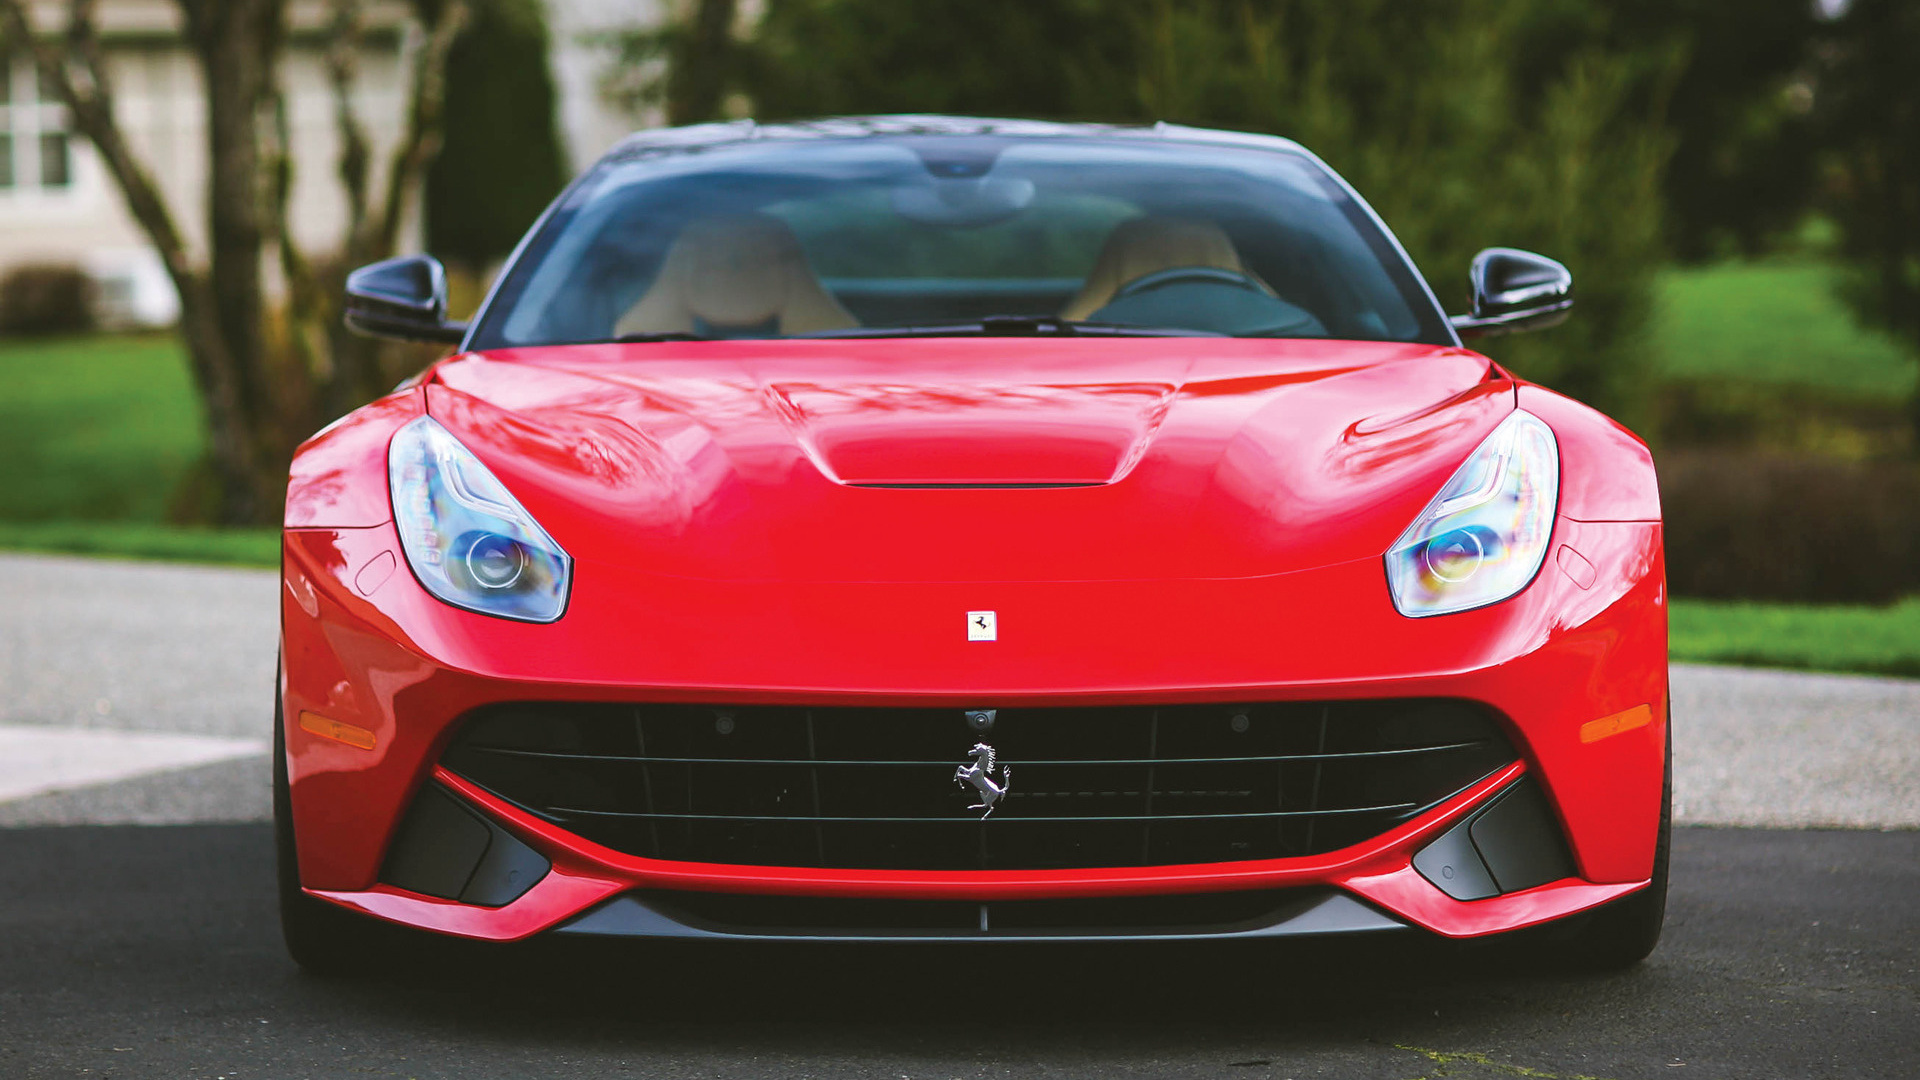 2017 Ferrari F12berlinetta The Magnum P I Us Wallpapers And Images, Photos, Reviews